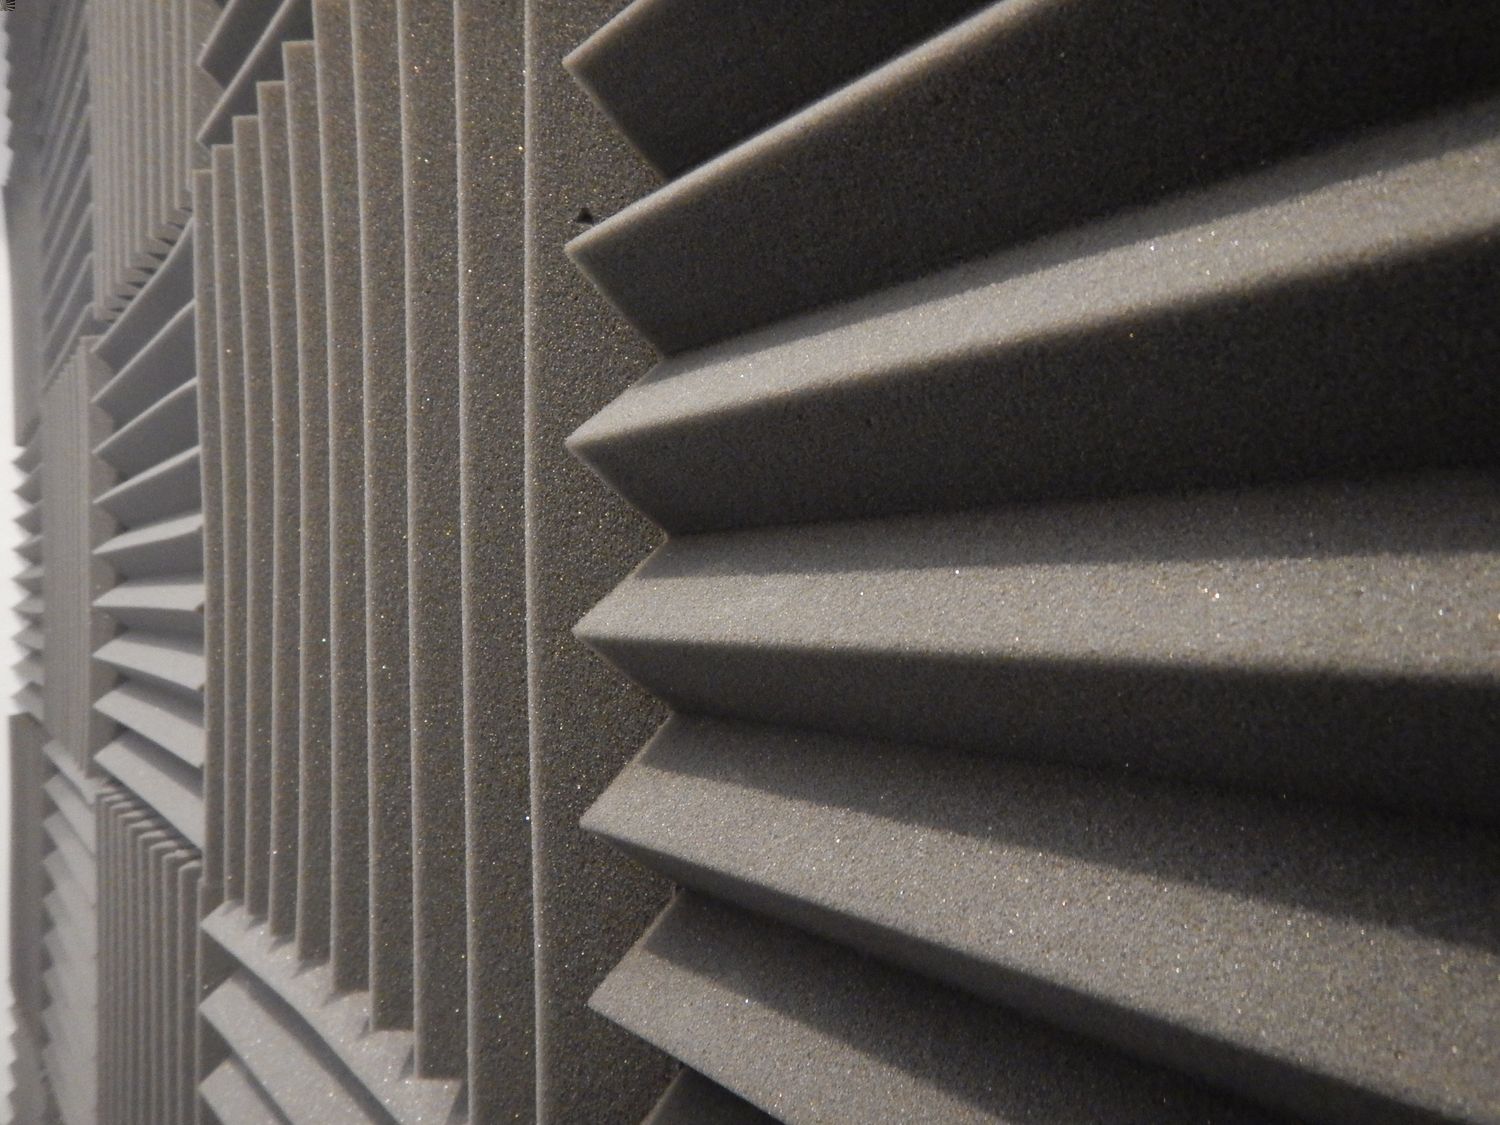 How Does Soundproofing Work?